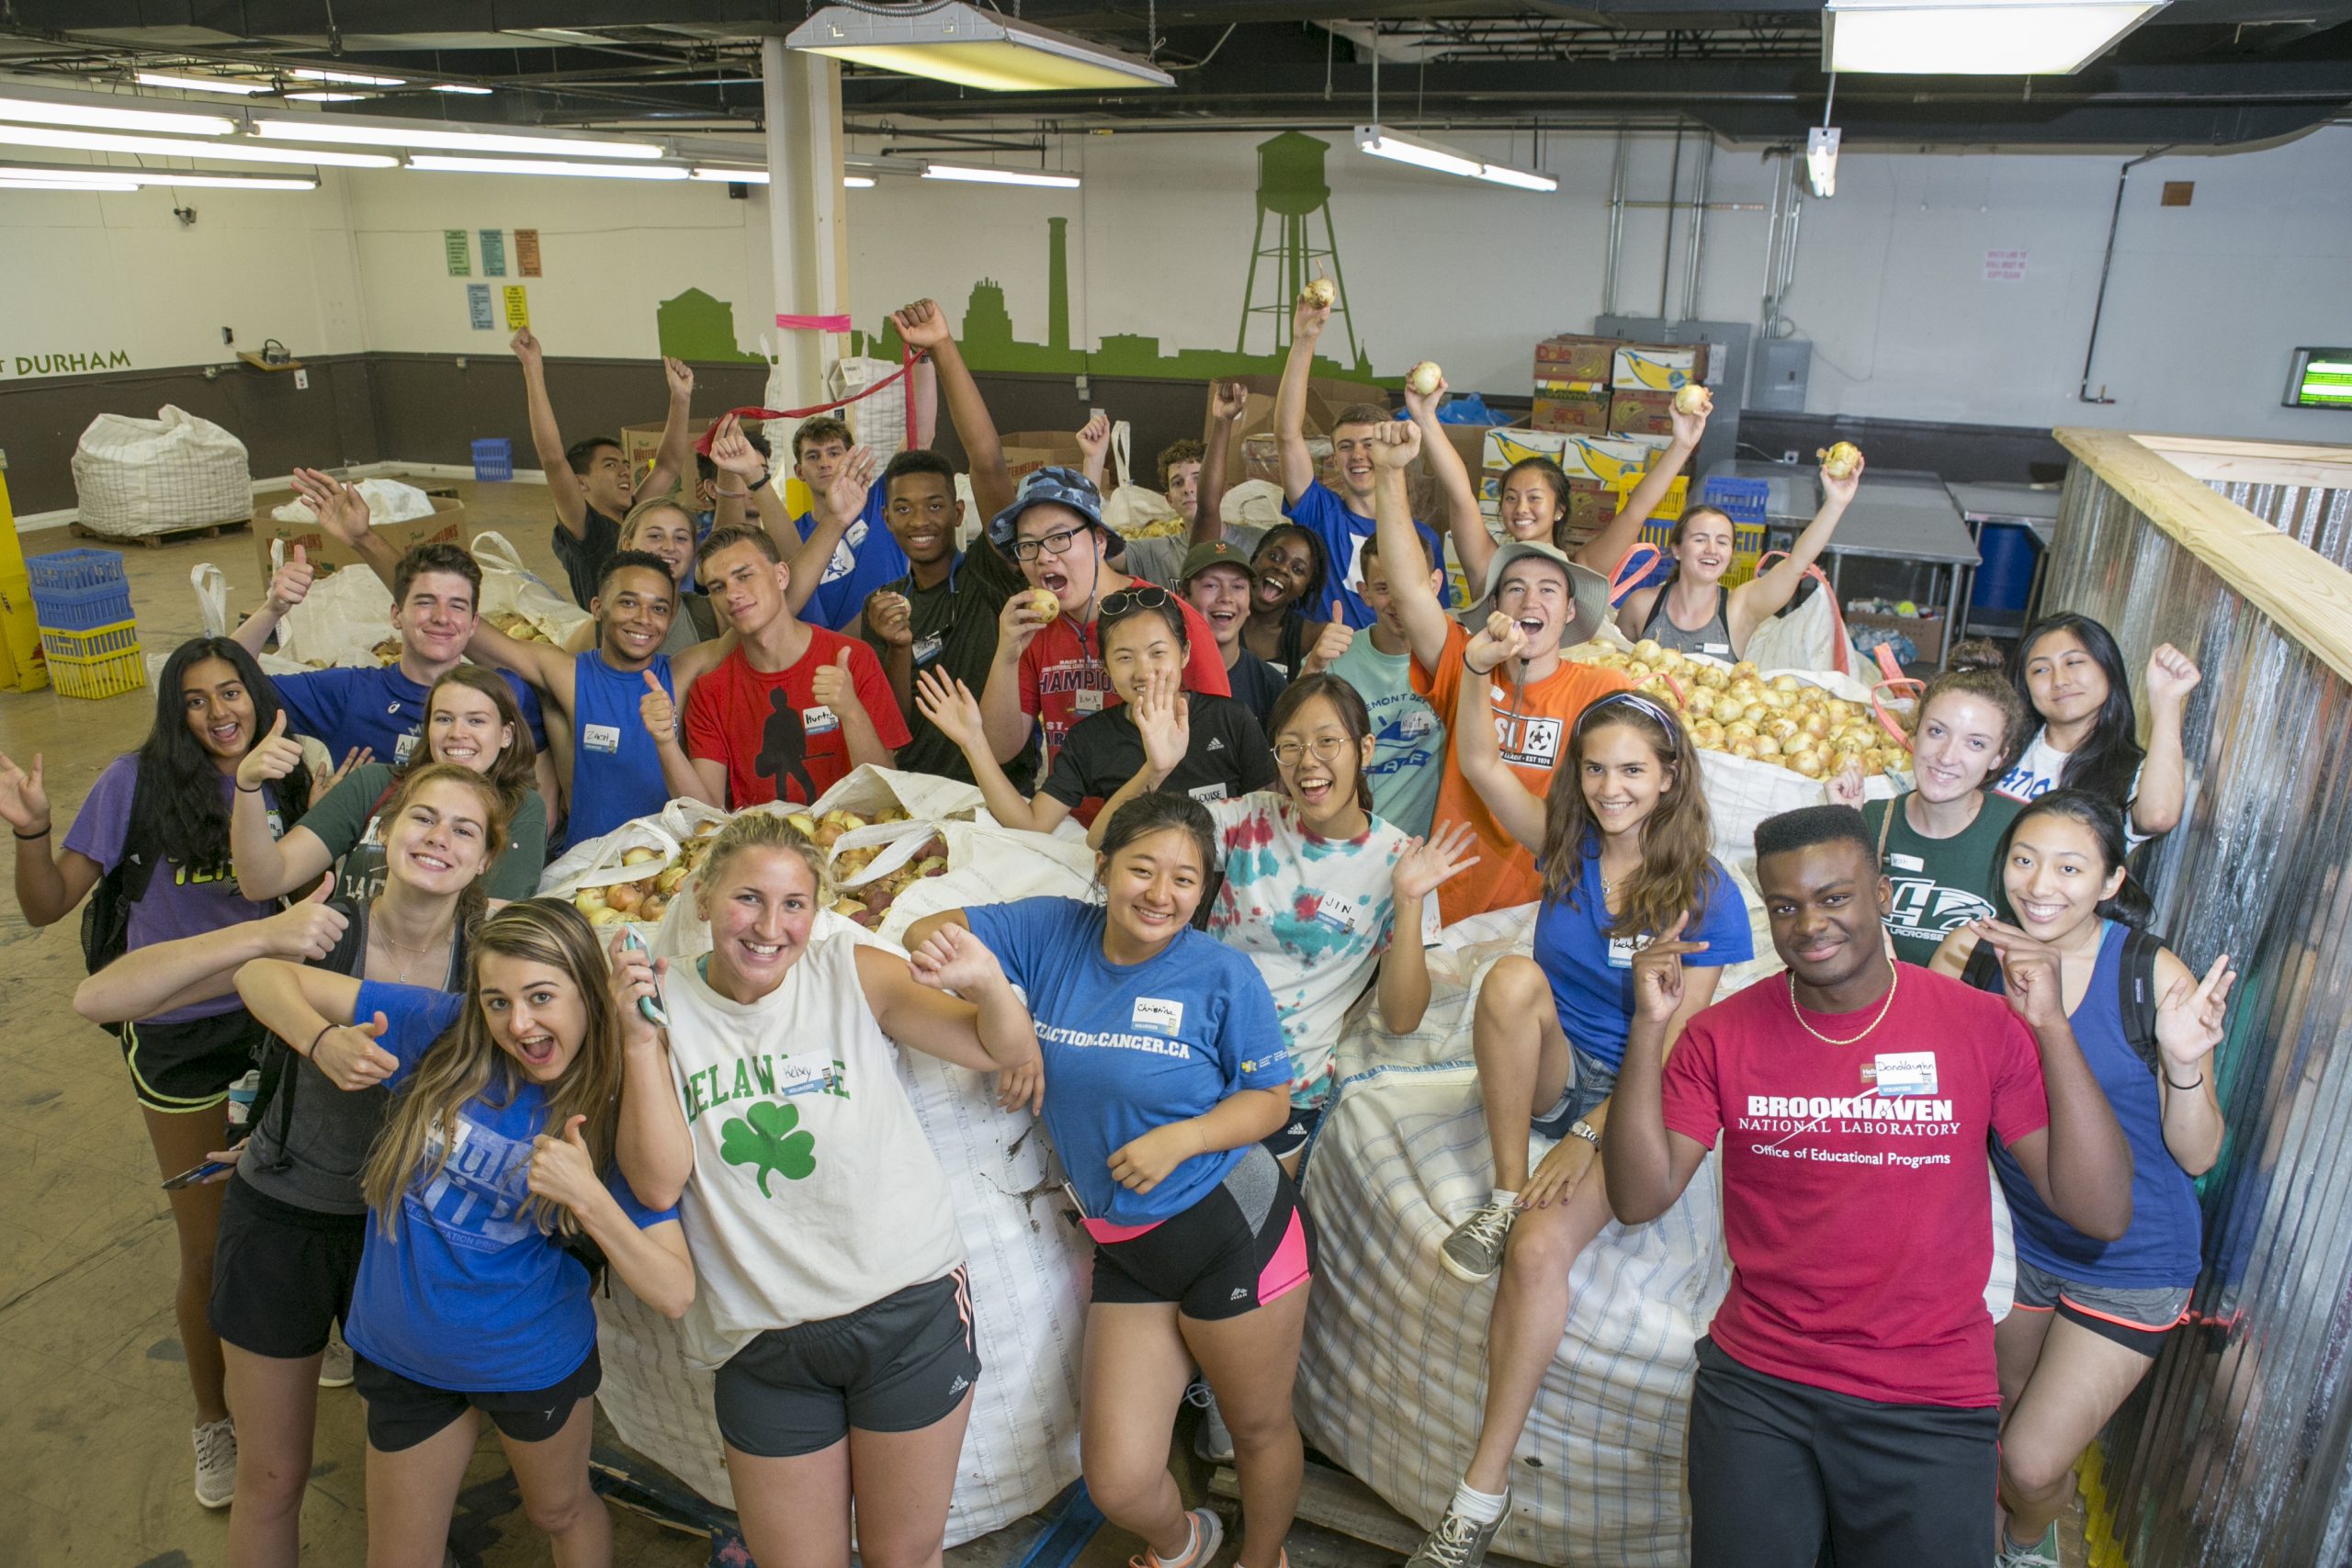 A large crowd of Duke students at the Durham Food bank posing with produce